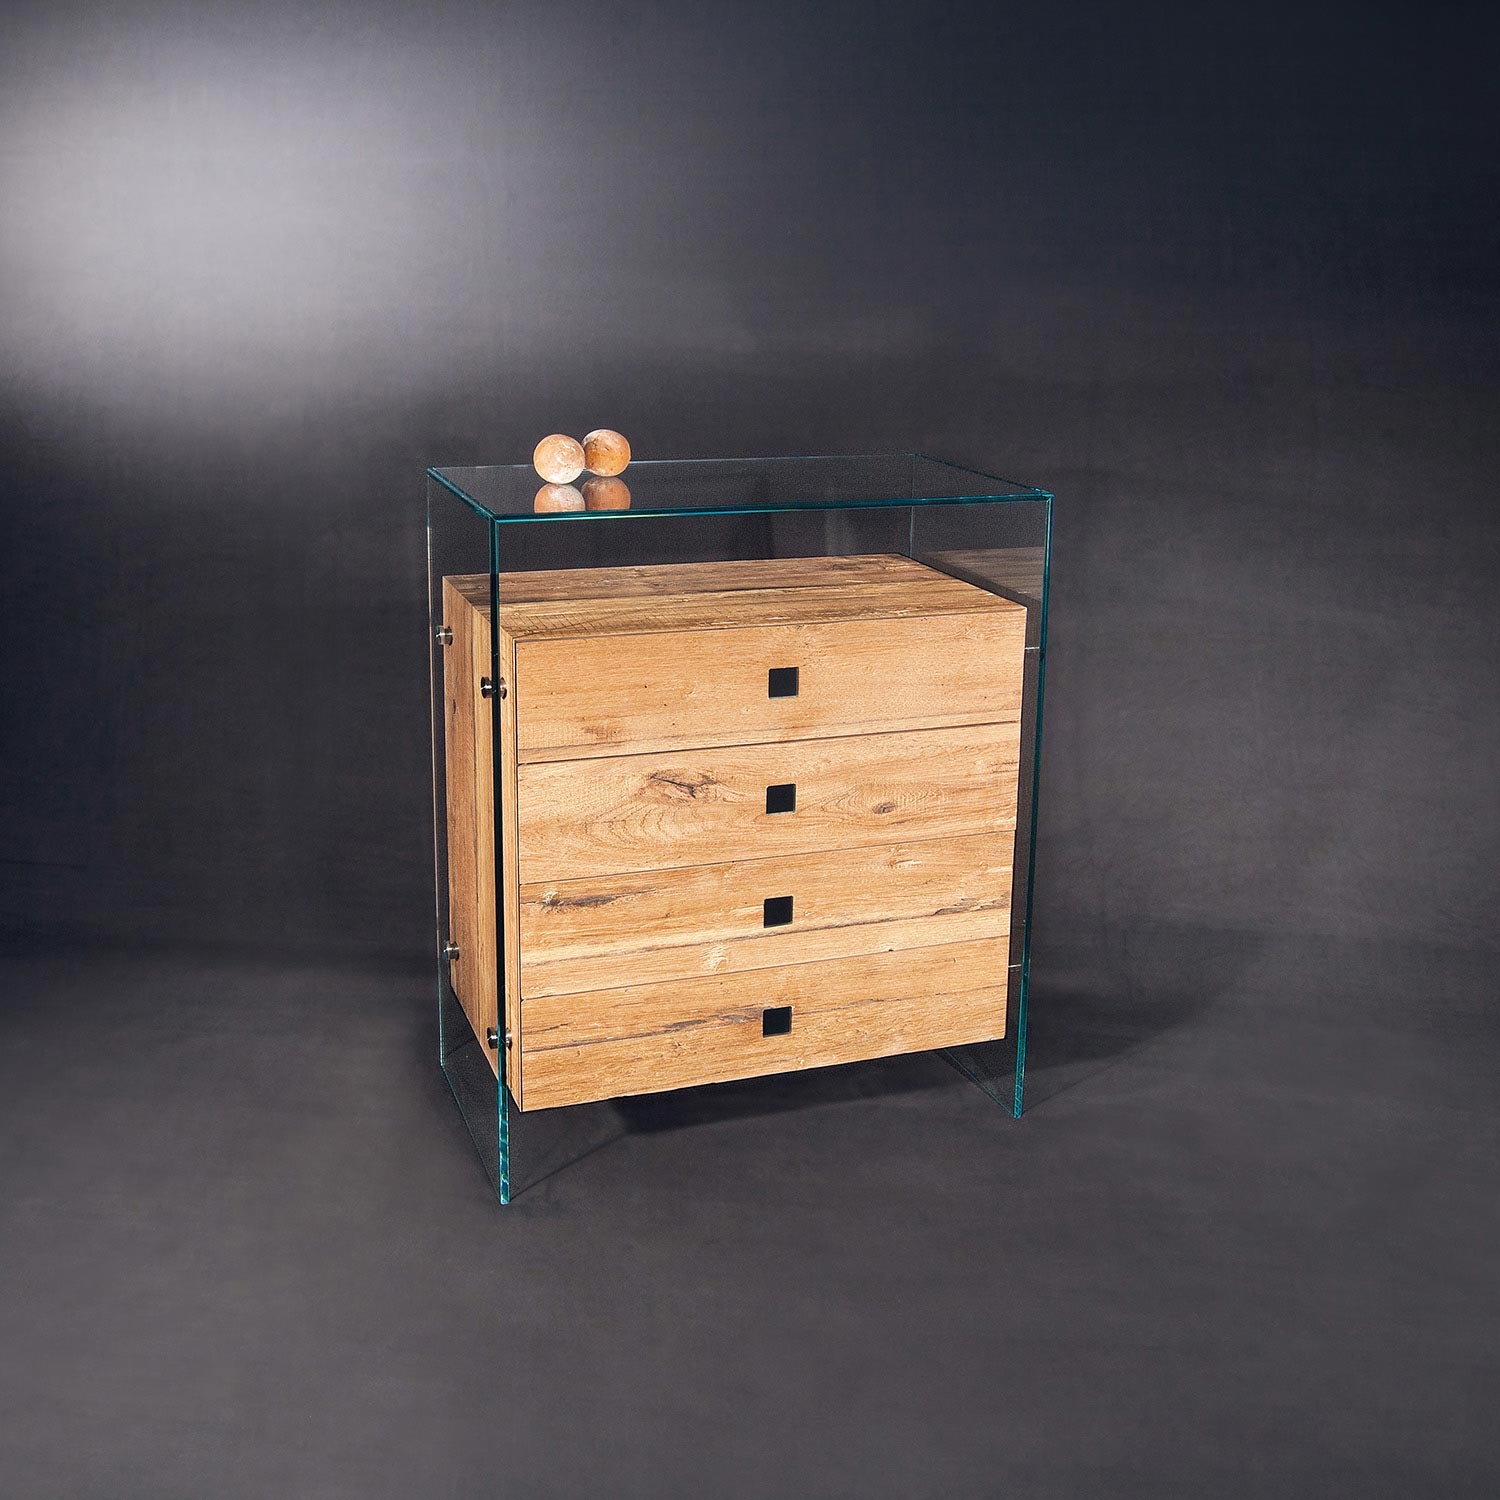 Solid wood commode FUSION wood 84 by DREIECK DESIGN: OPTIWHITE + wood vintage amber